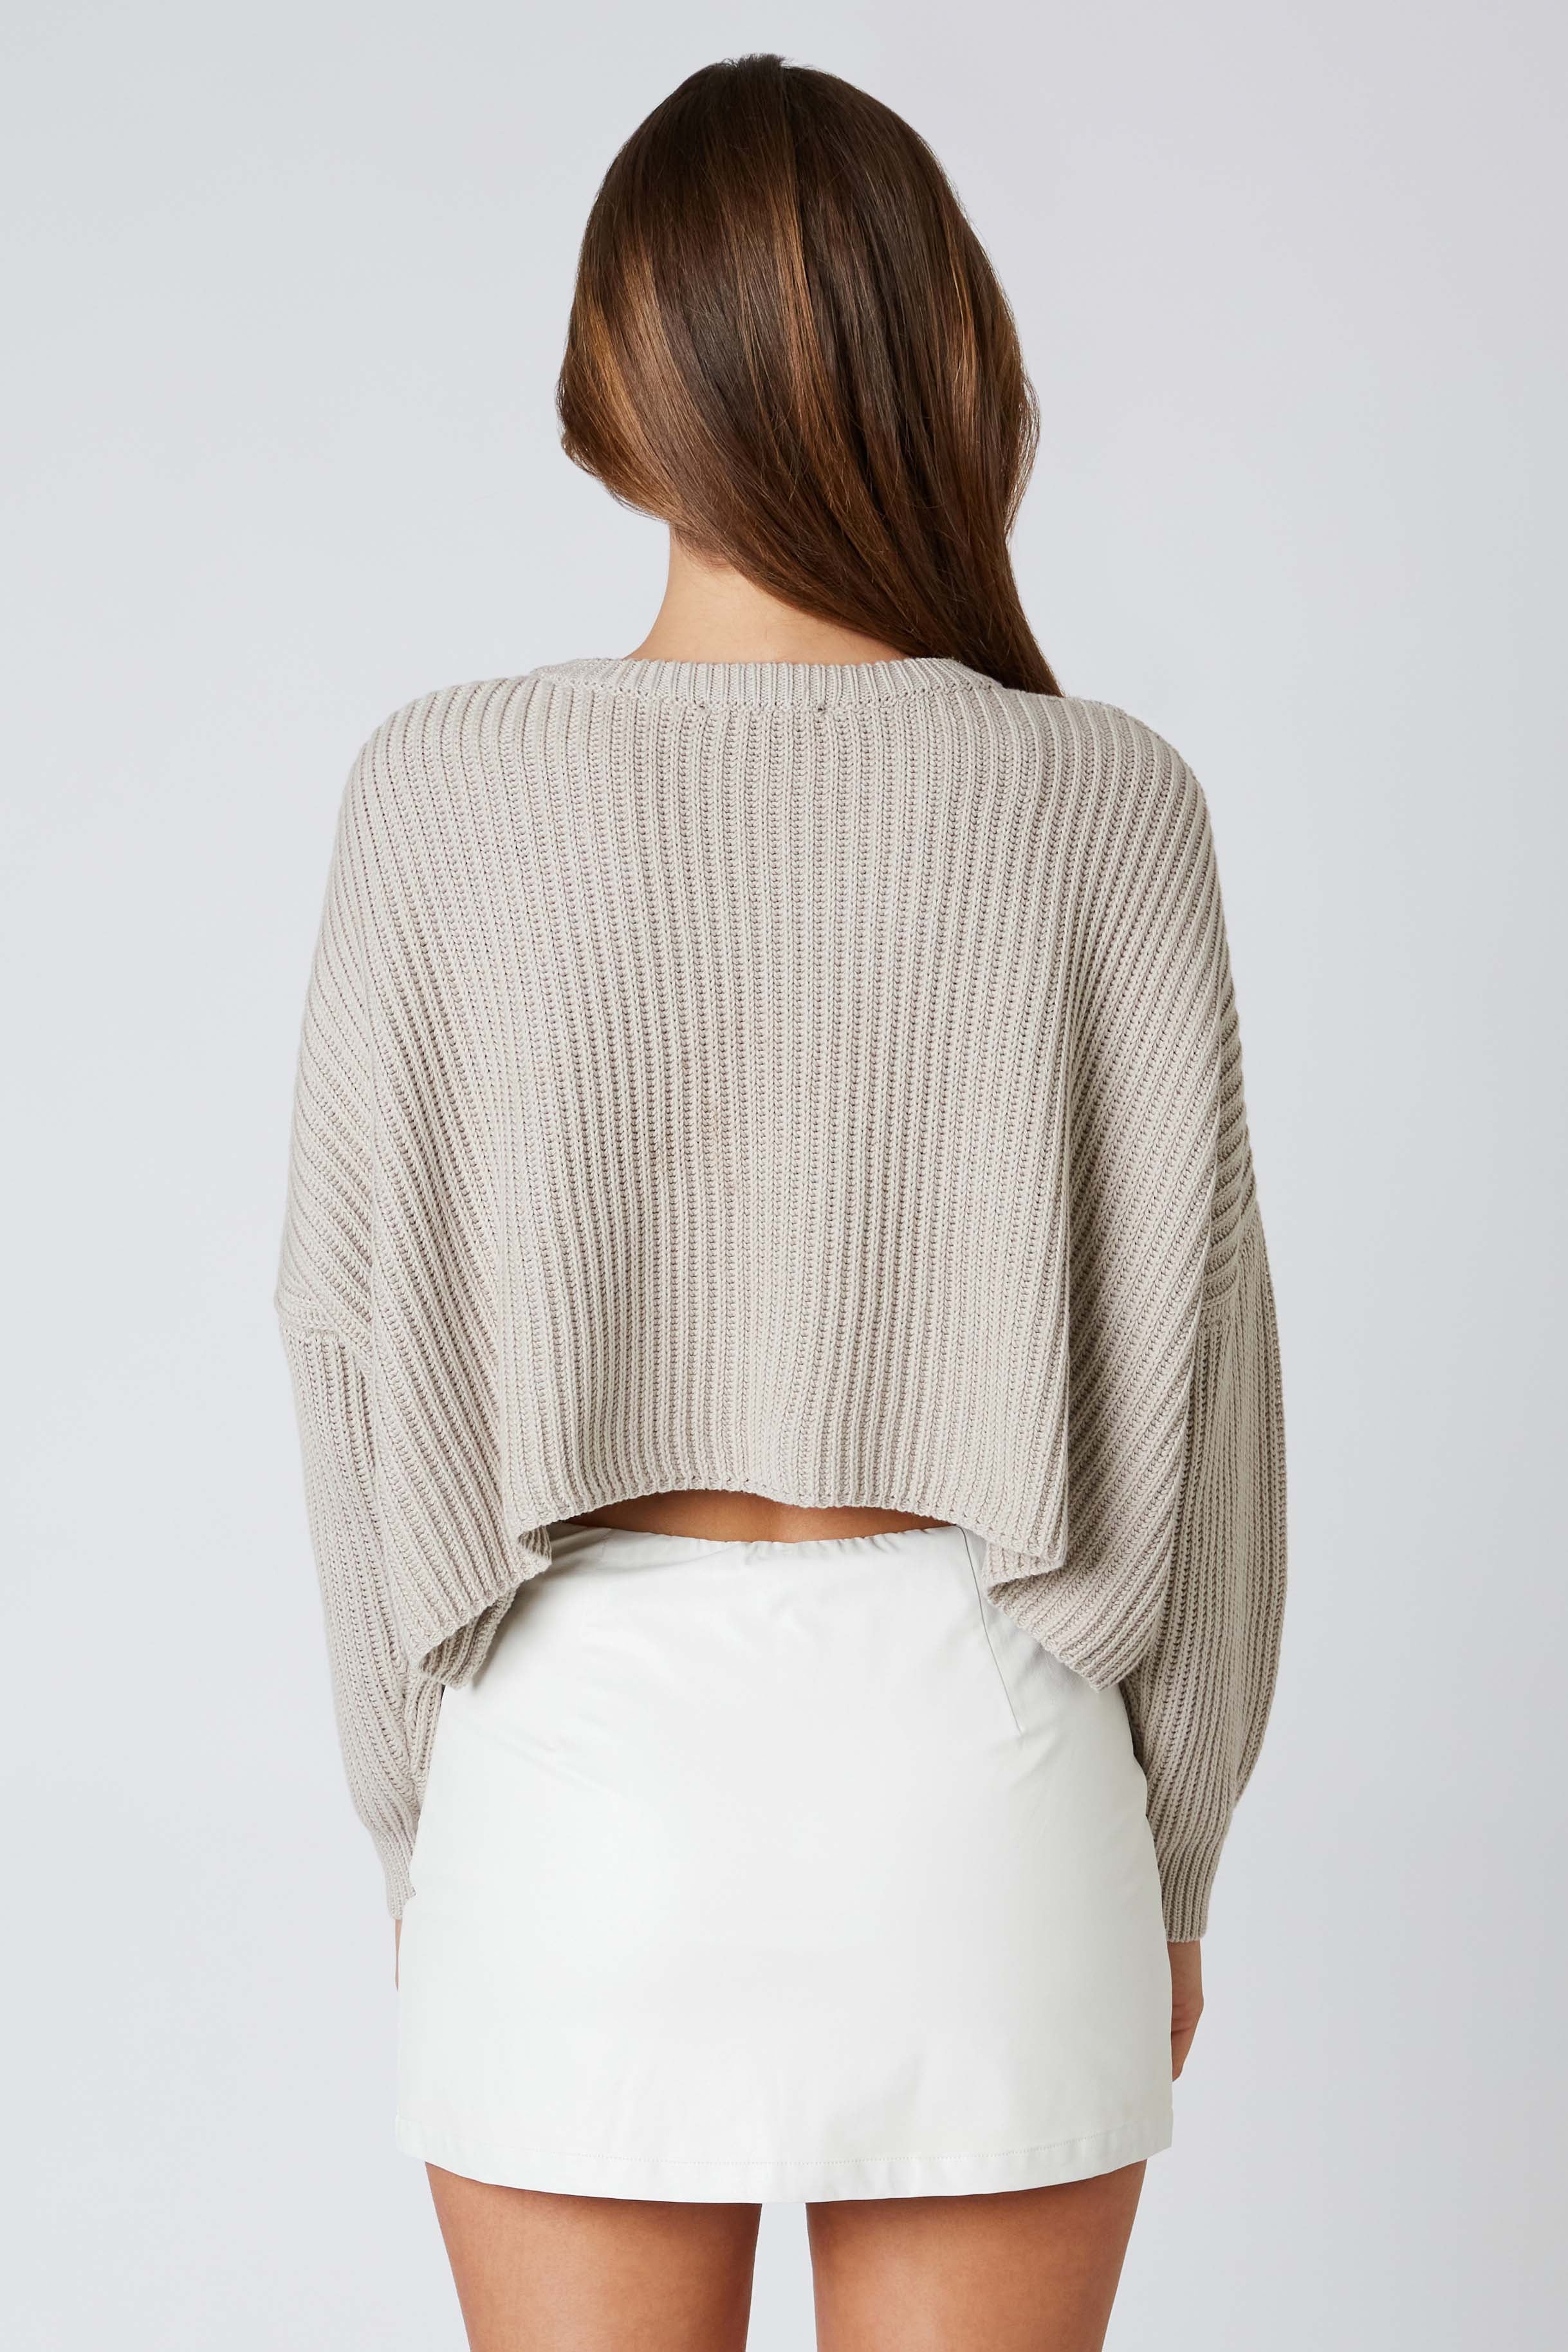 Boxy Cropped Sweater in Pebble Back View